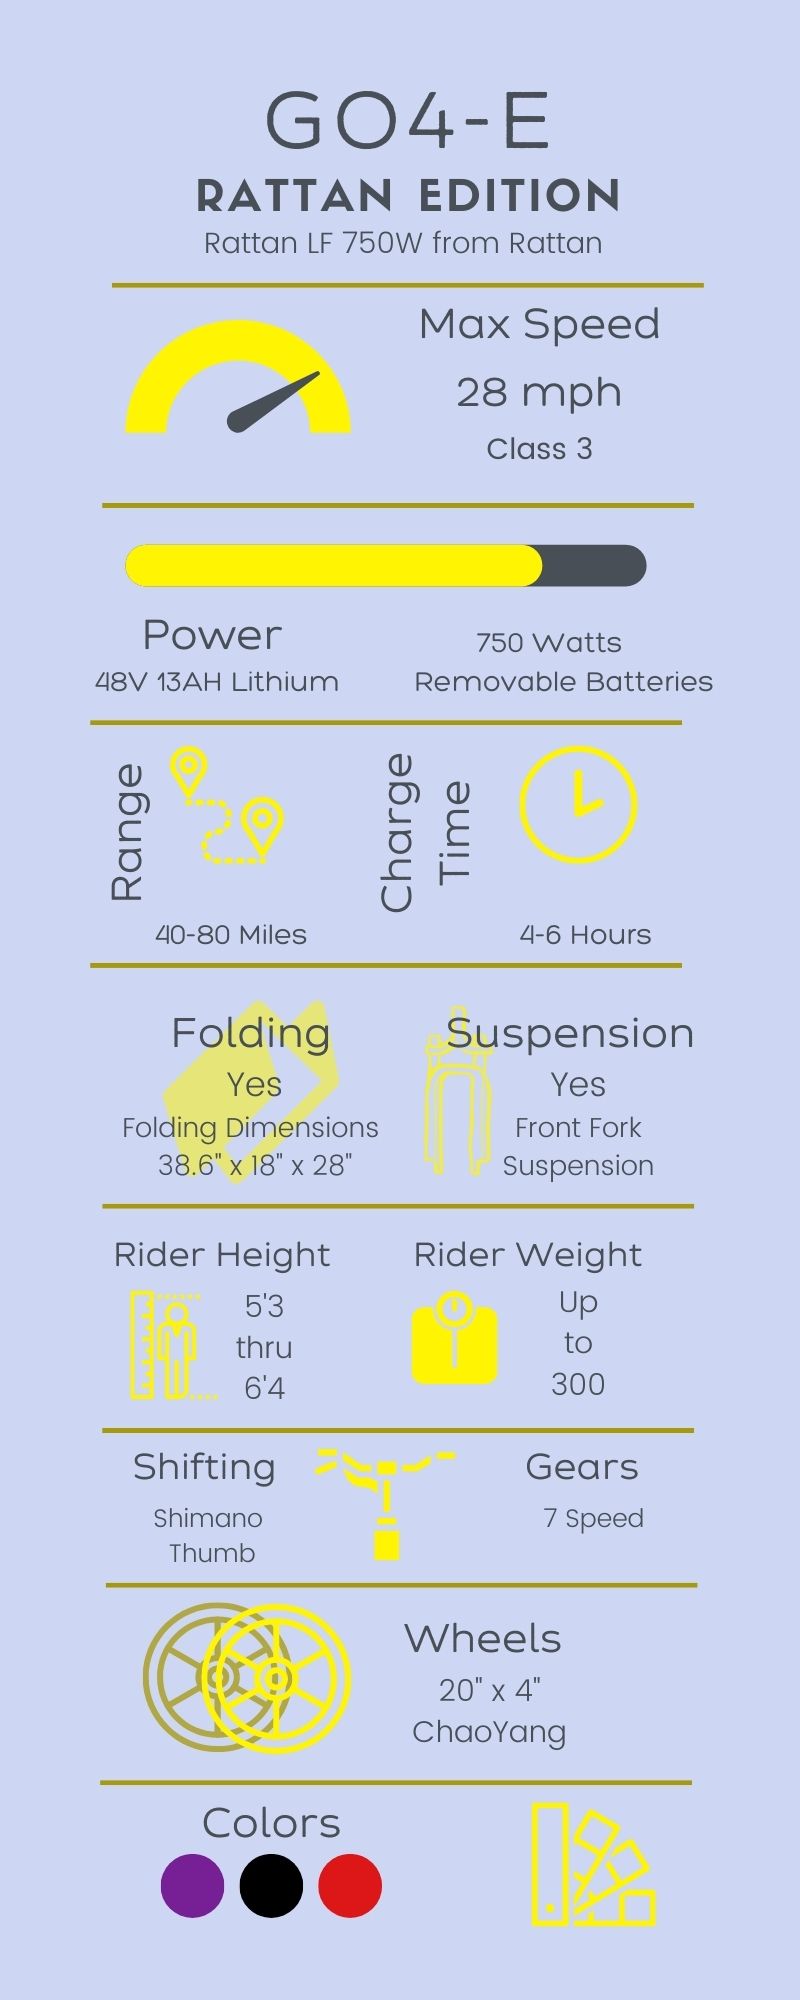 Infographic about the Rattan 750W eBike from Rattan that is compatible with the Go4-E Connection Kit to create a Blackbird Bikes Sociable Tandem side-by-side quadribike. This 4 wheel bicycle offers a stable ride inclusive for all abilities and adaptive to special needs riders.